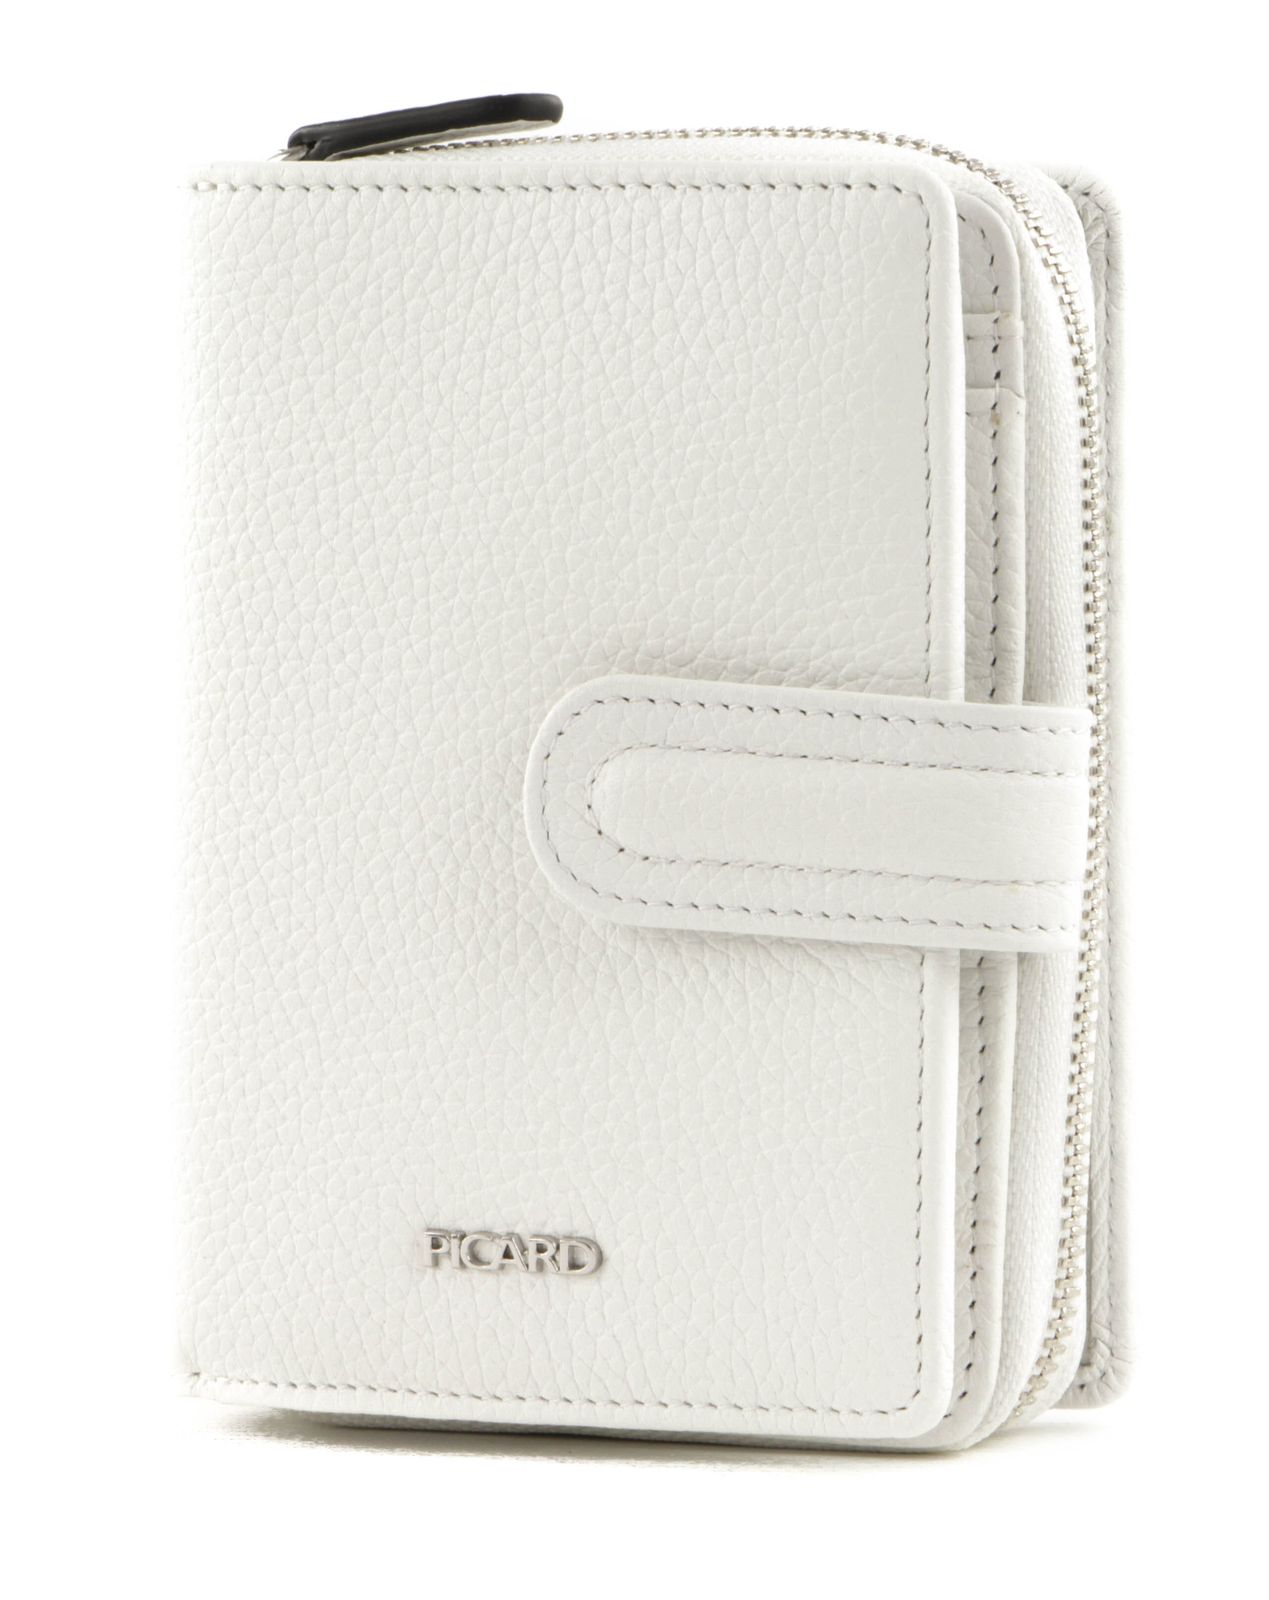 PICARD Neapel 1 Trifold Wallet White | Buy bags, purses & accessories ...